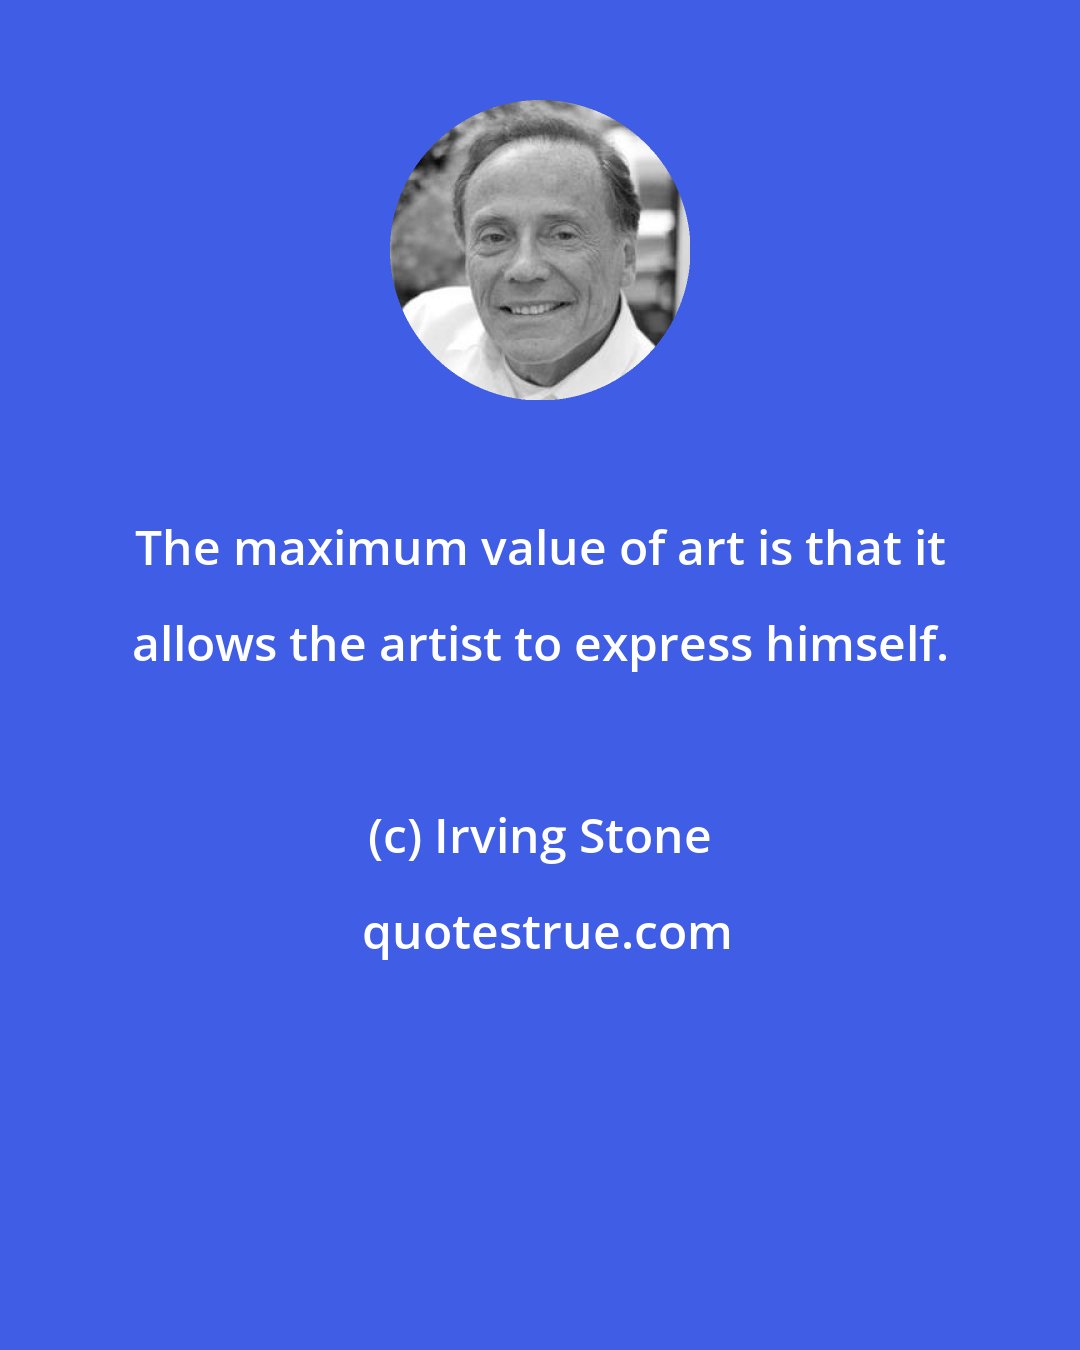 Irving Stone: The maximum value of art is that it allows the artist to express himself.